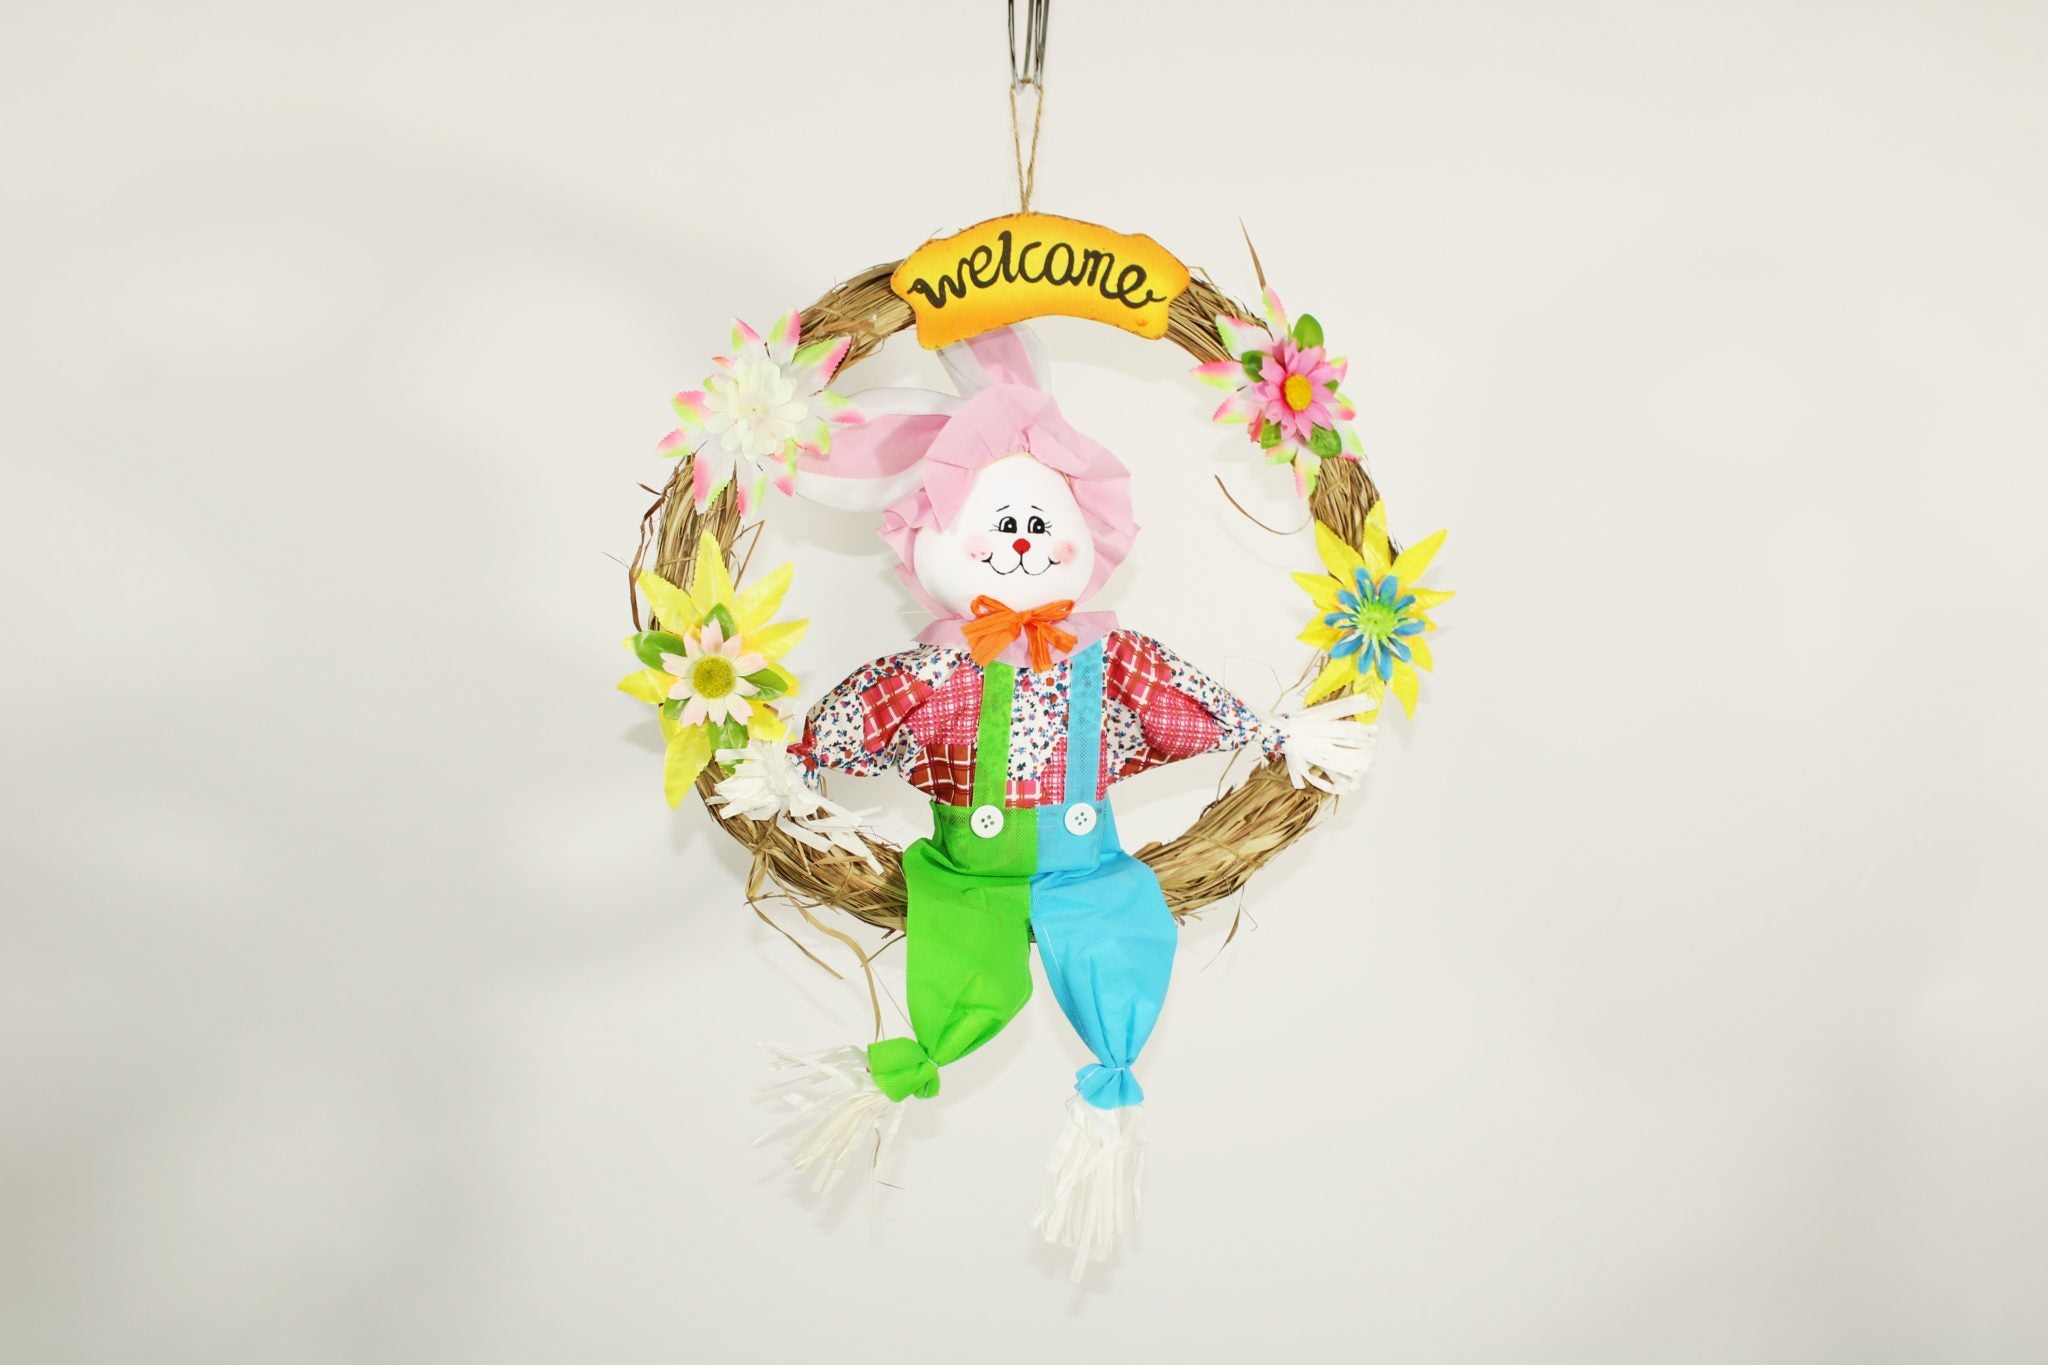 "Welcome" Easter Wreath